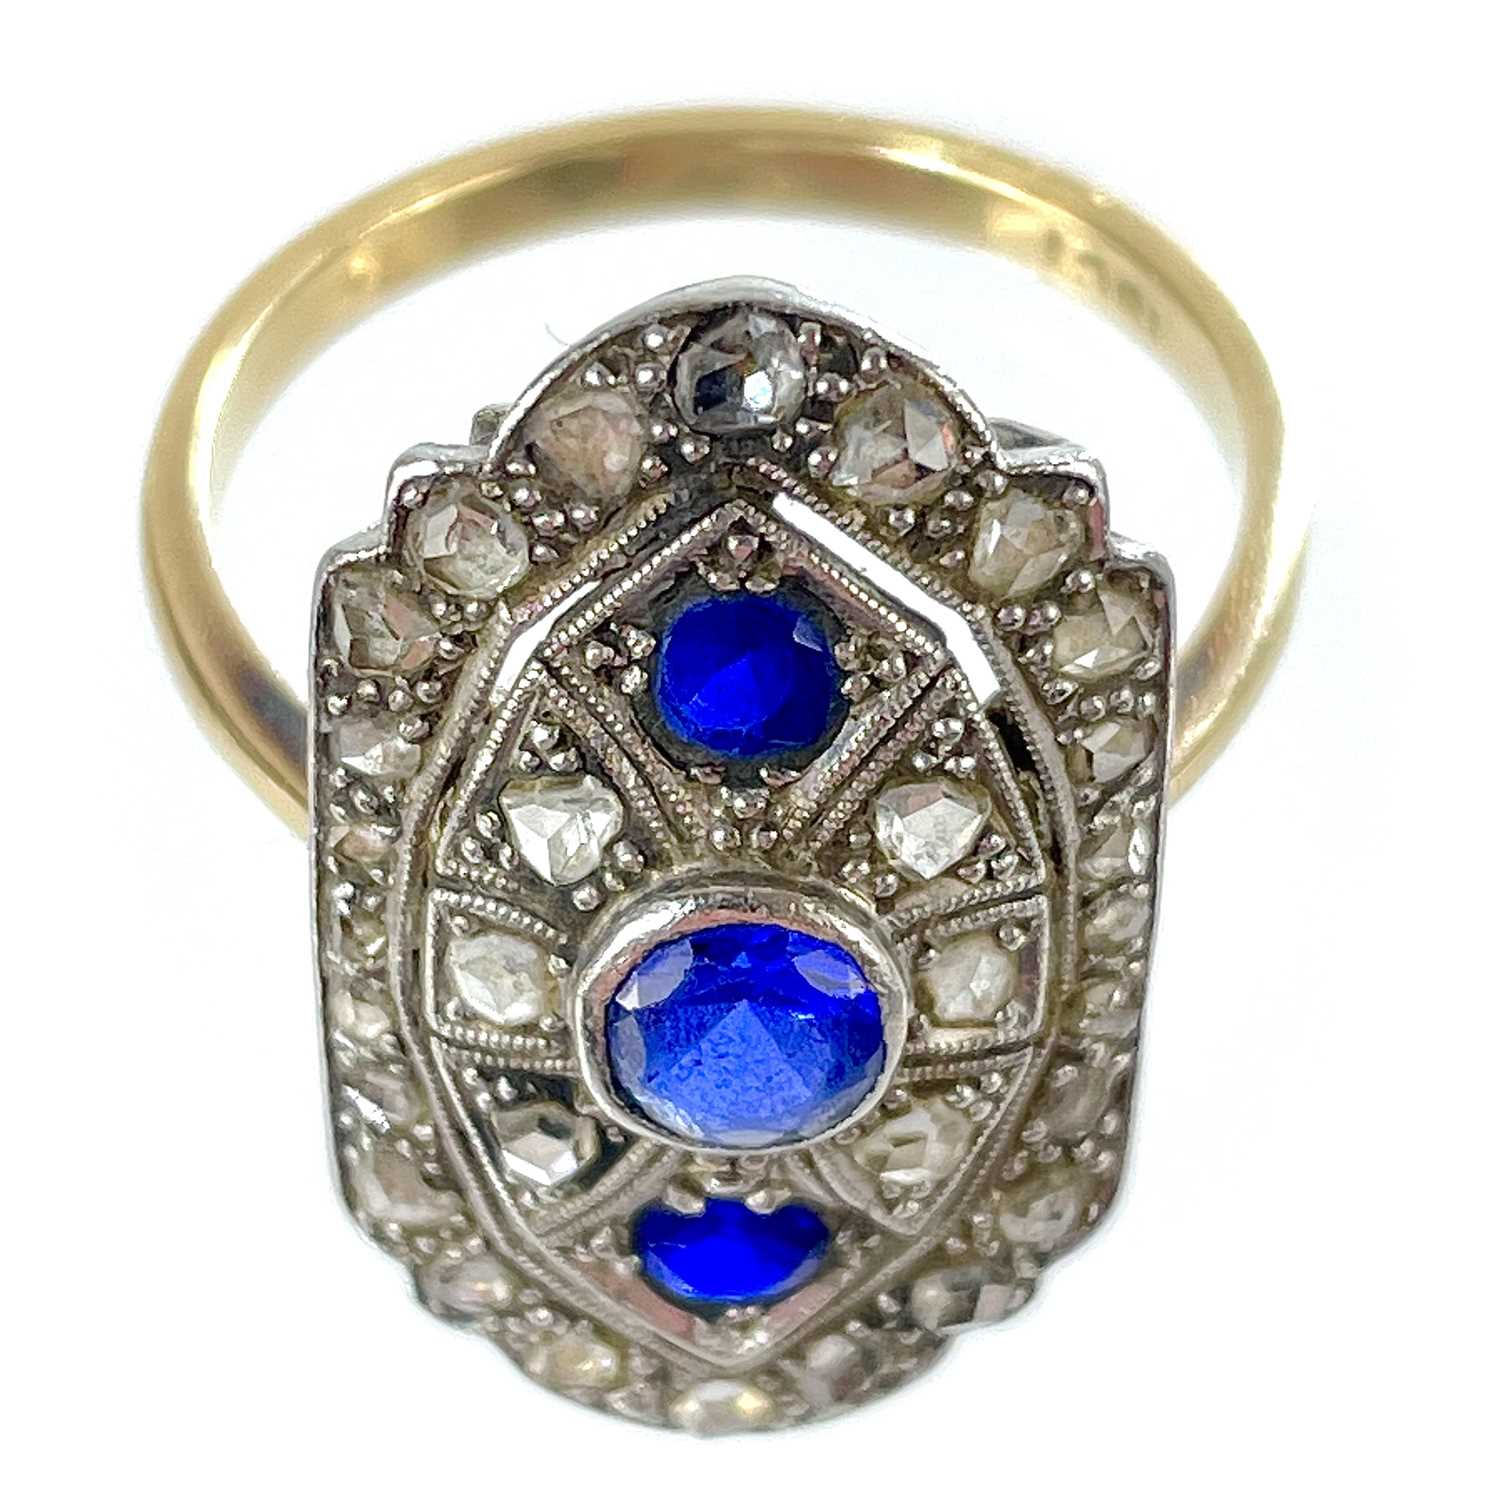 A stylish Art Deco period 18ct yellow and white gold diamond and sapphire panel ring. - Image 7 of 12